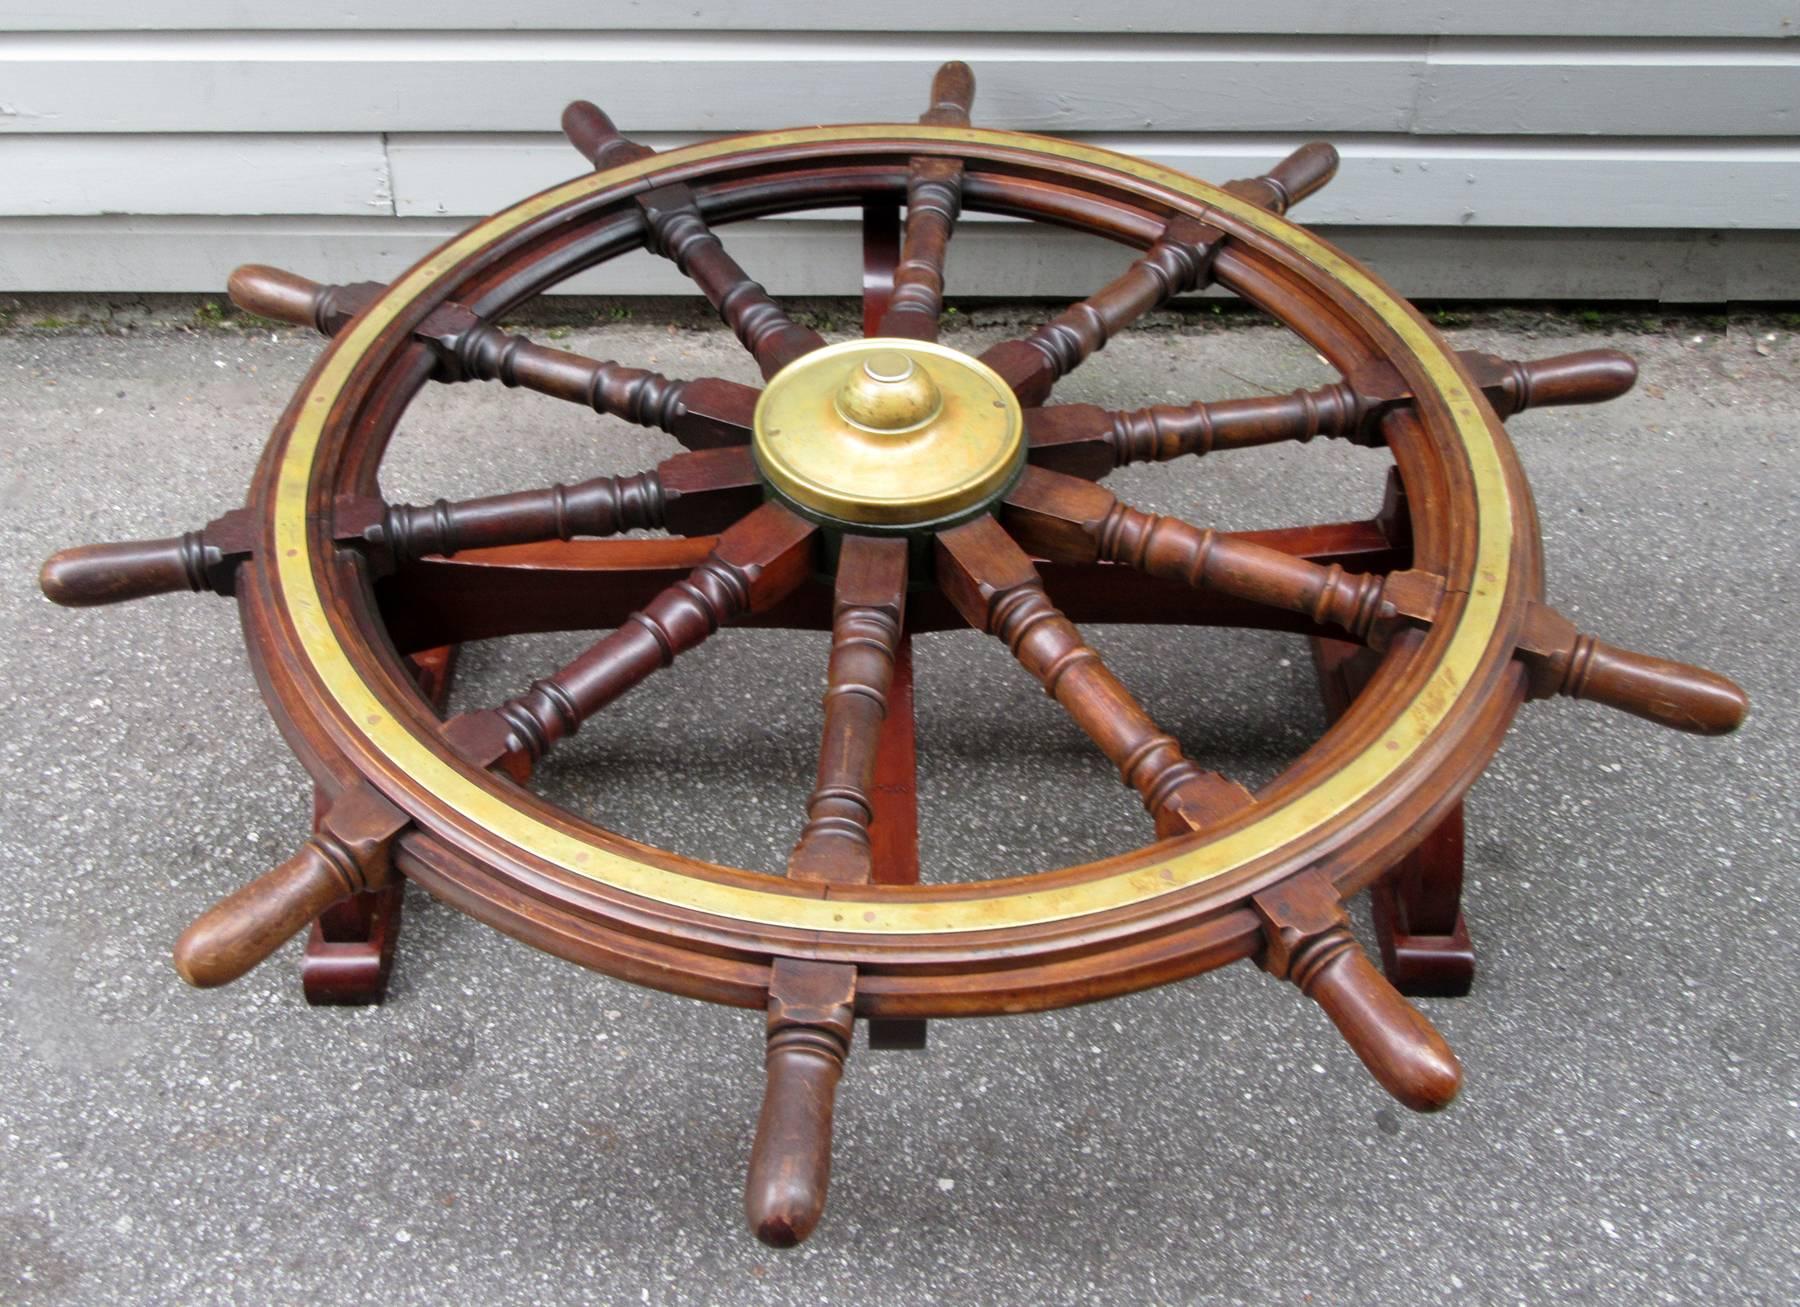 An authentic English mahogany ship's wheel coffee table, circa 1780, with custom mahogany base and glass top. Provenance: Purchased from private collection previously on loan to a Florida maritime museum.